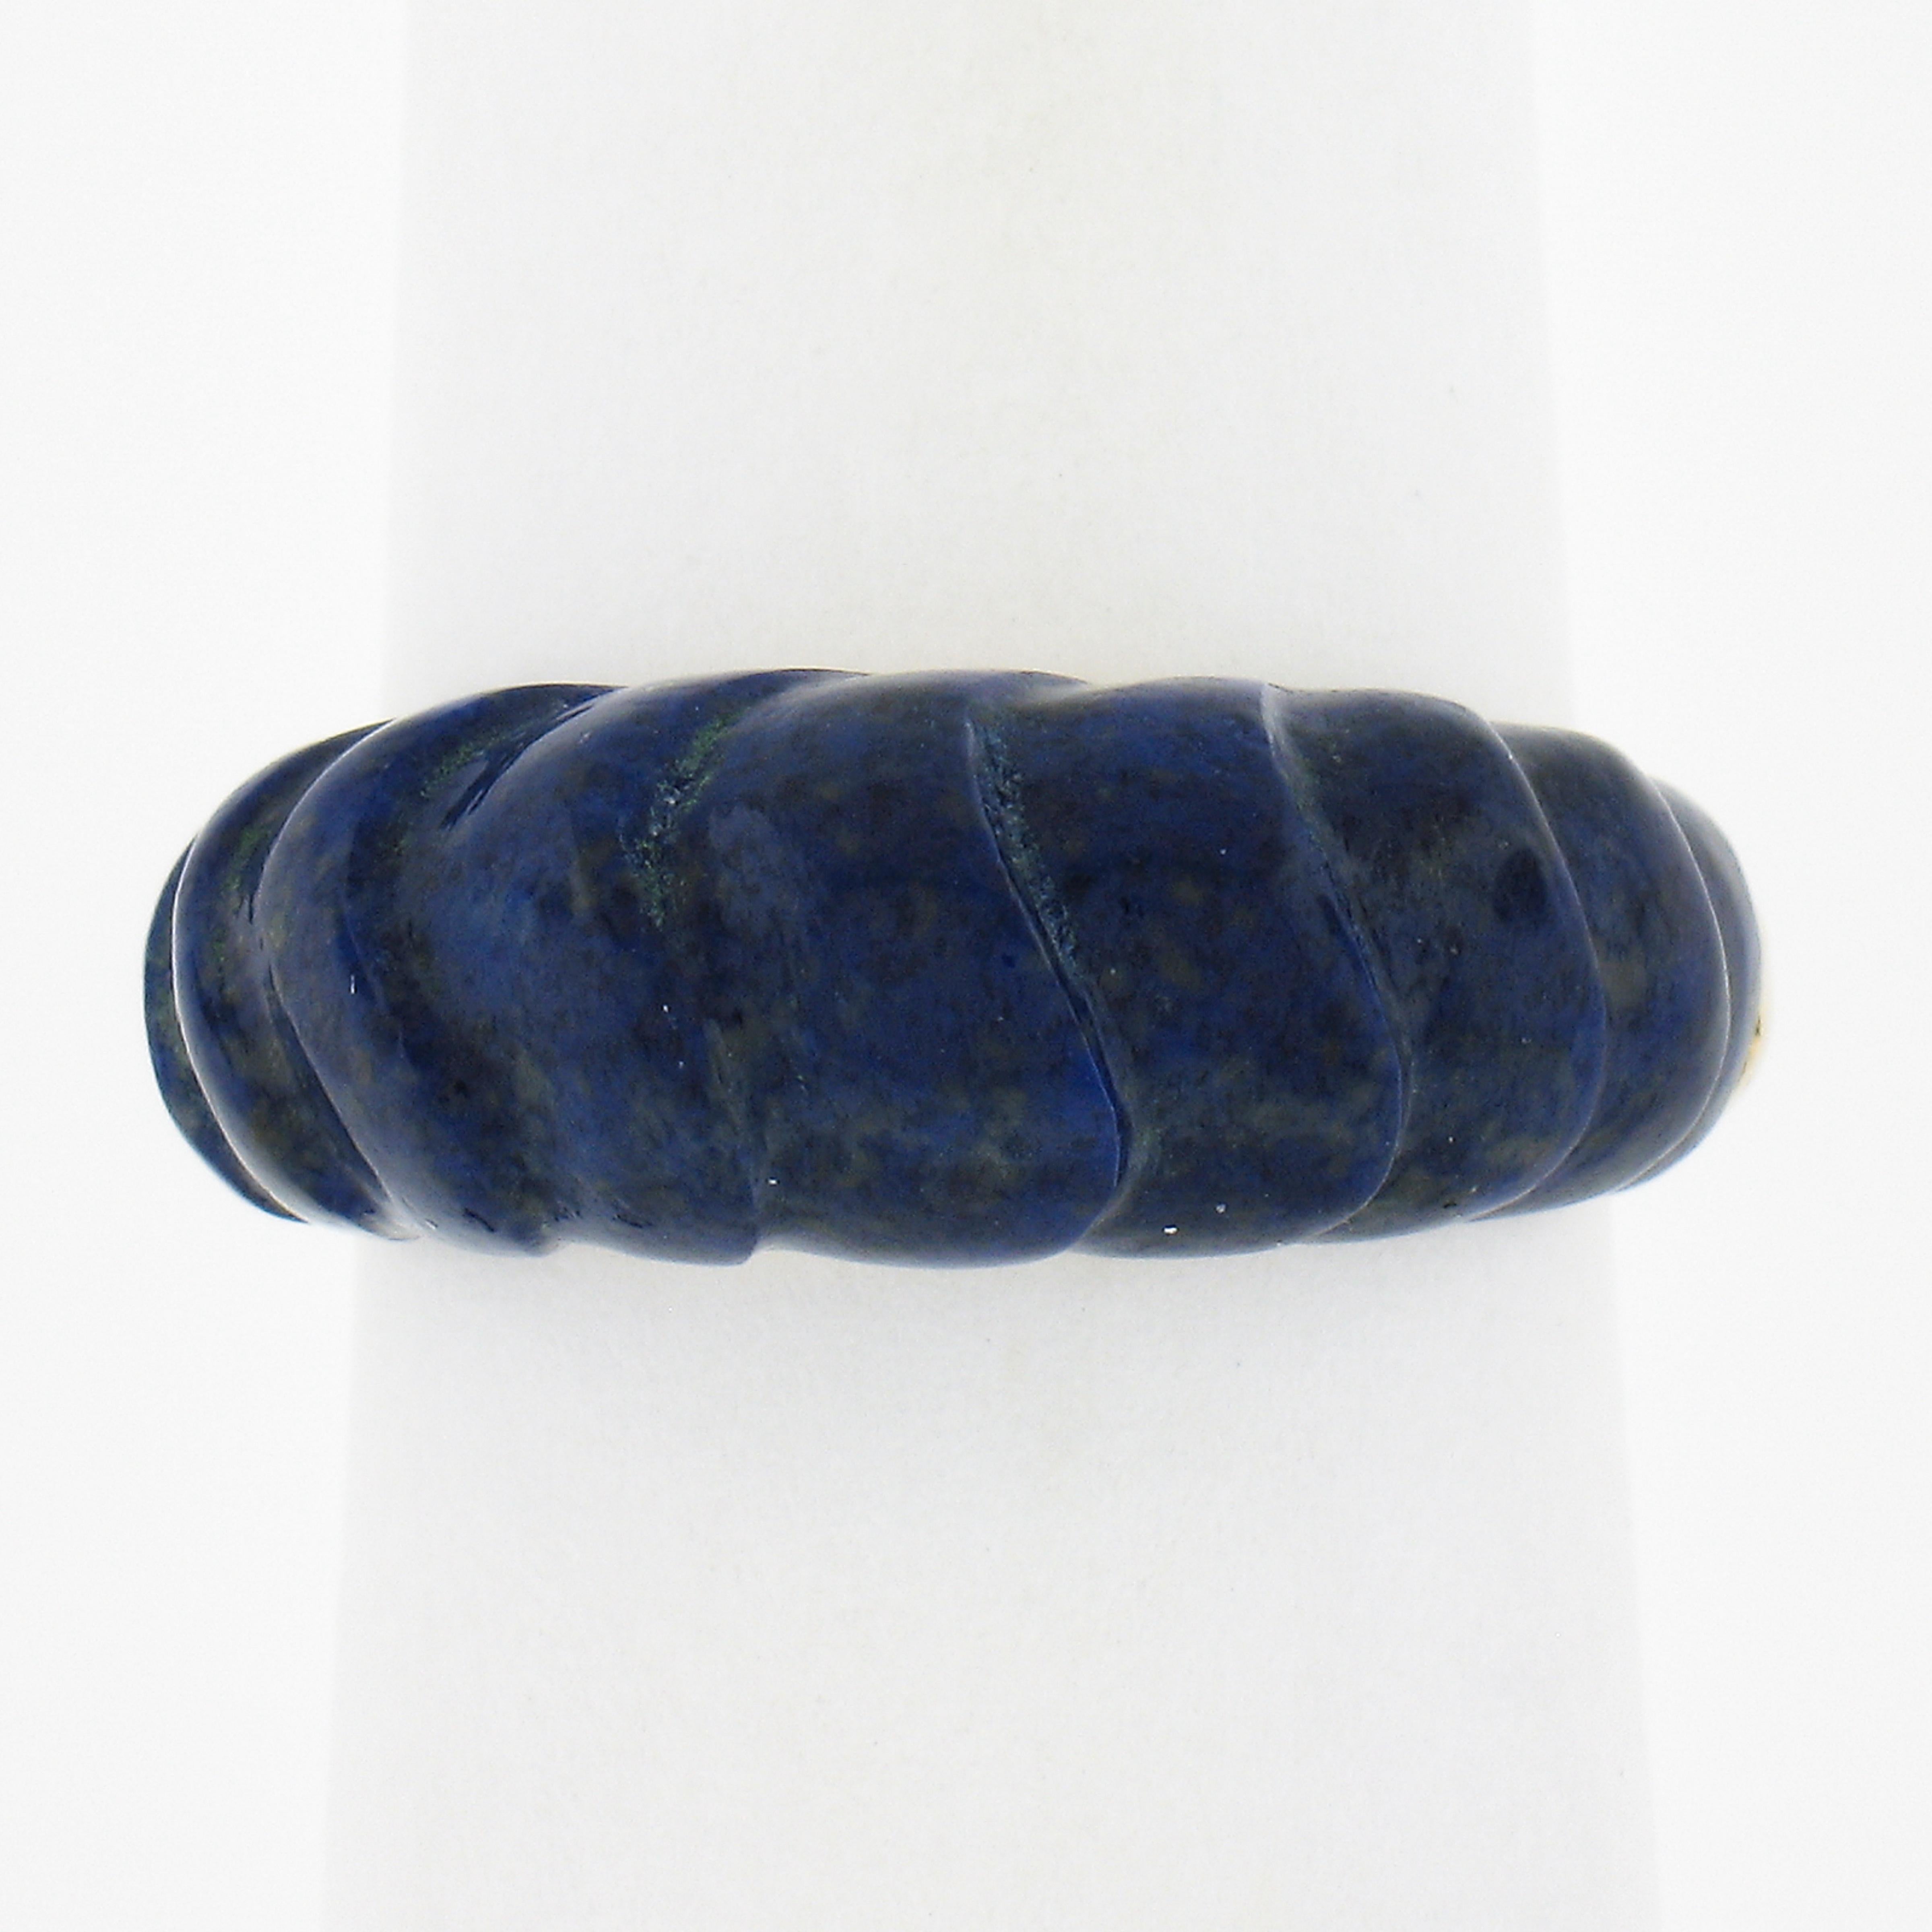 --Stone(s):--
(1) Natural Genuine Lapis - Carved Custom Cut - Inlaid Set - Deep Blue Color

Material: Solid 14k Yellow Gold 
Weight: 5.80 Grams
Ring Size: 5.5 (Fitted on a finger. We can NOT custom size this ring)
Ring Width: 7.7mm (0.30